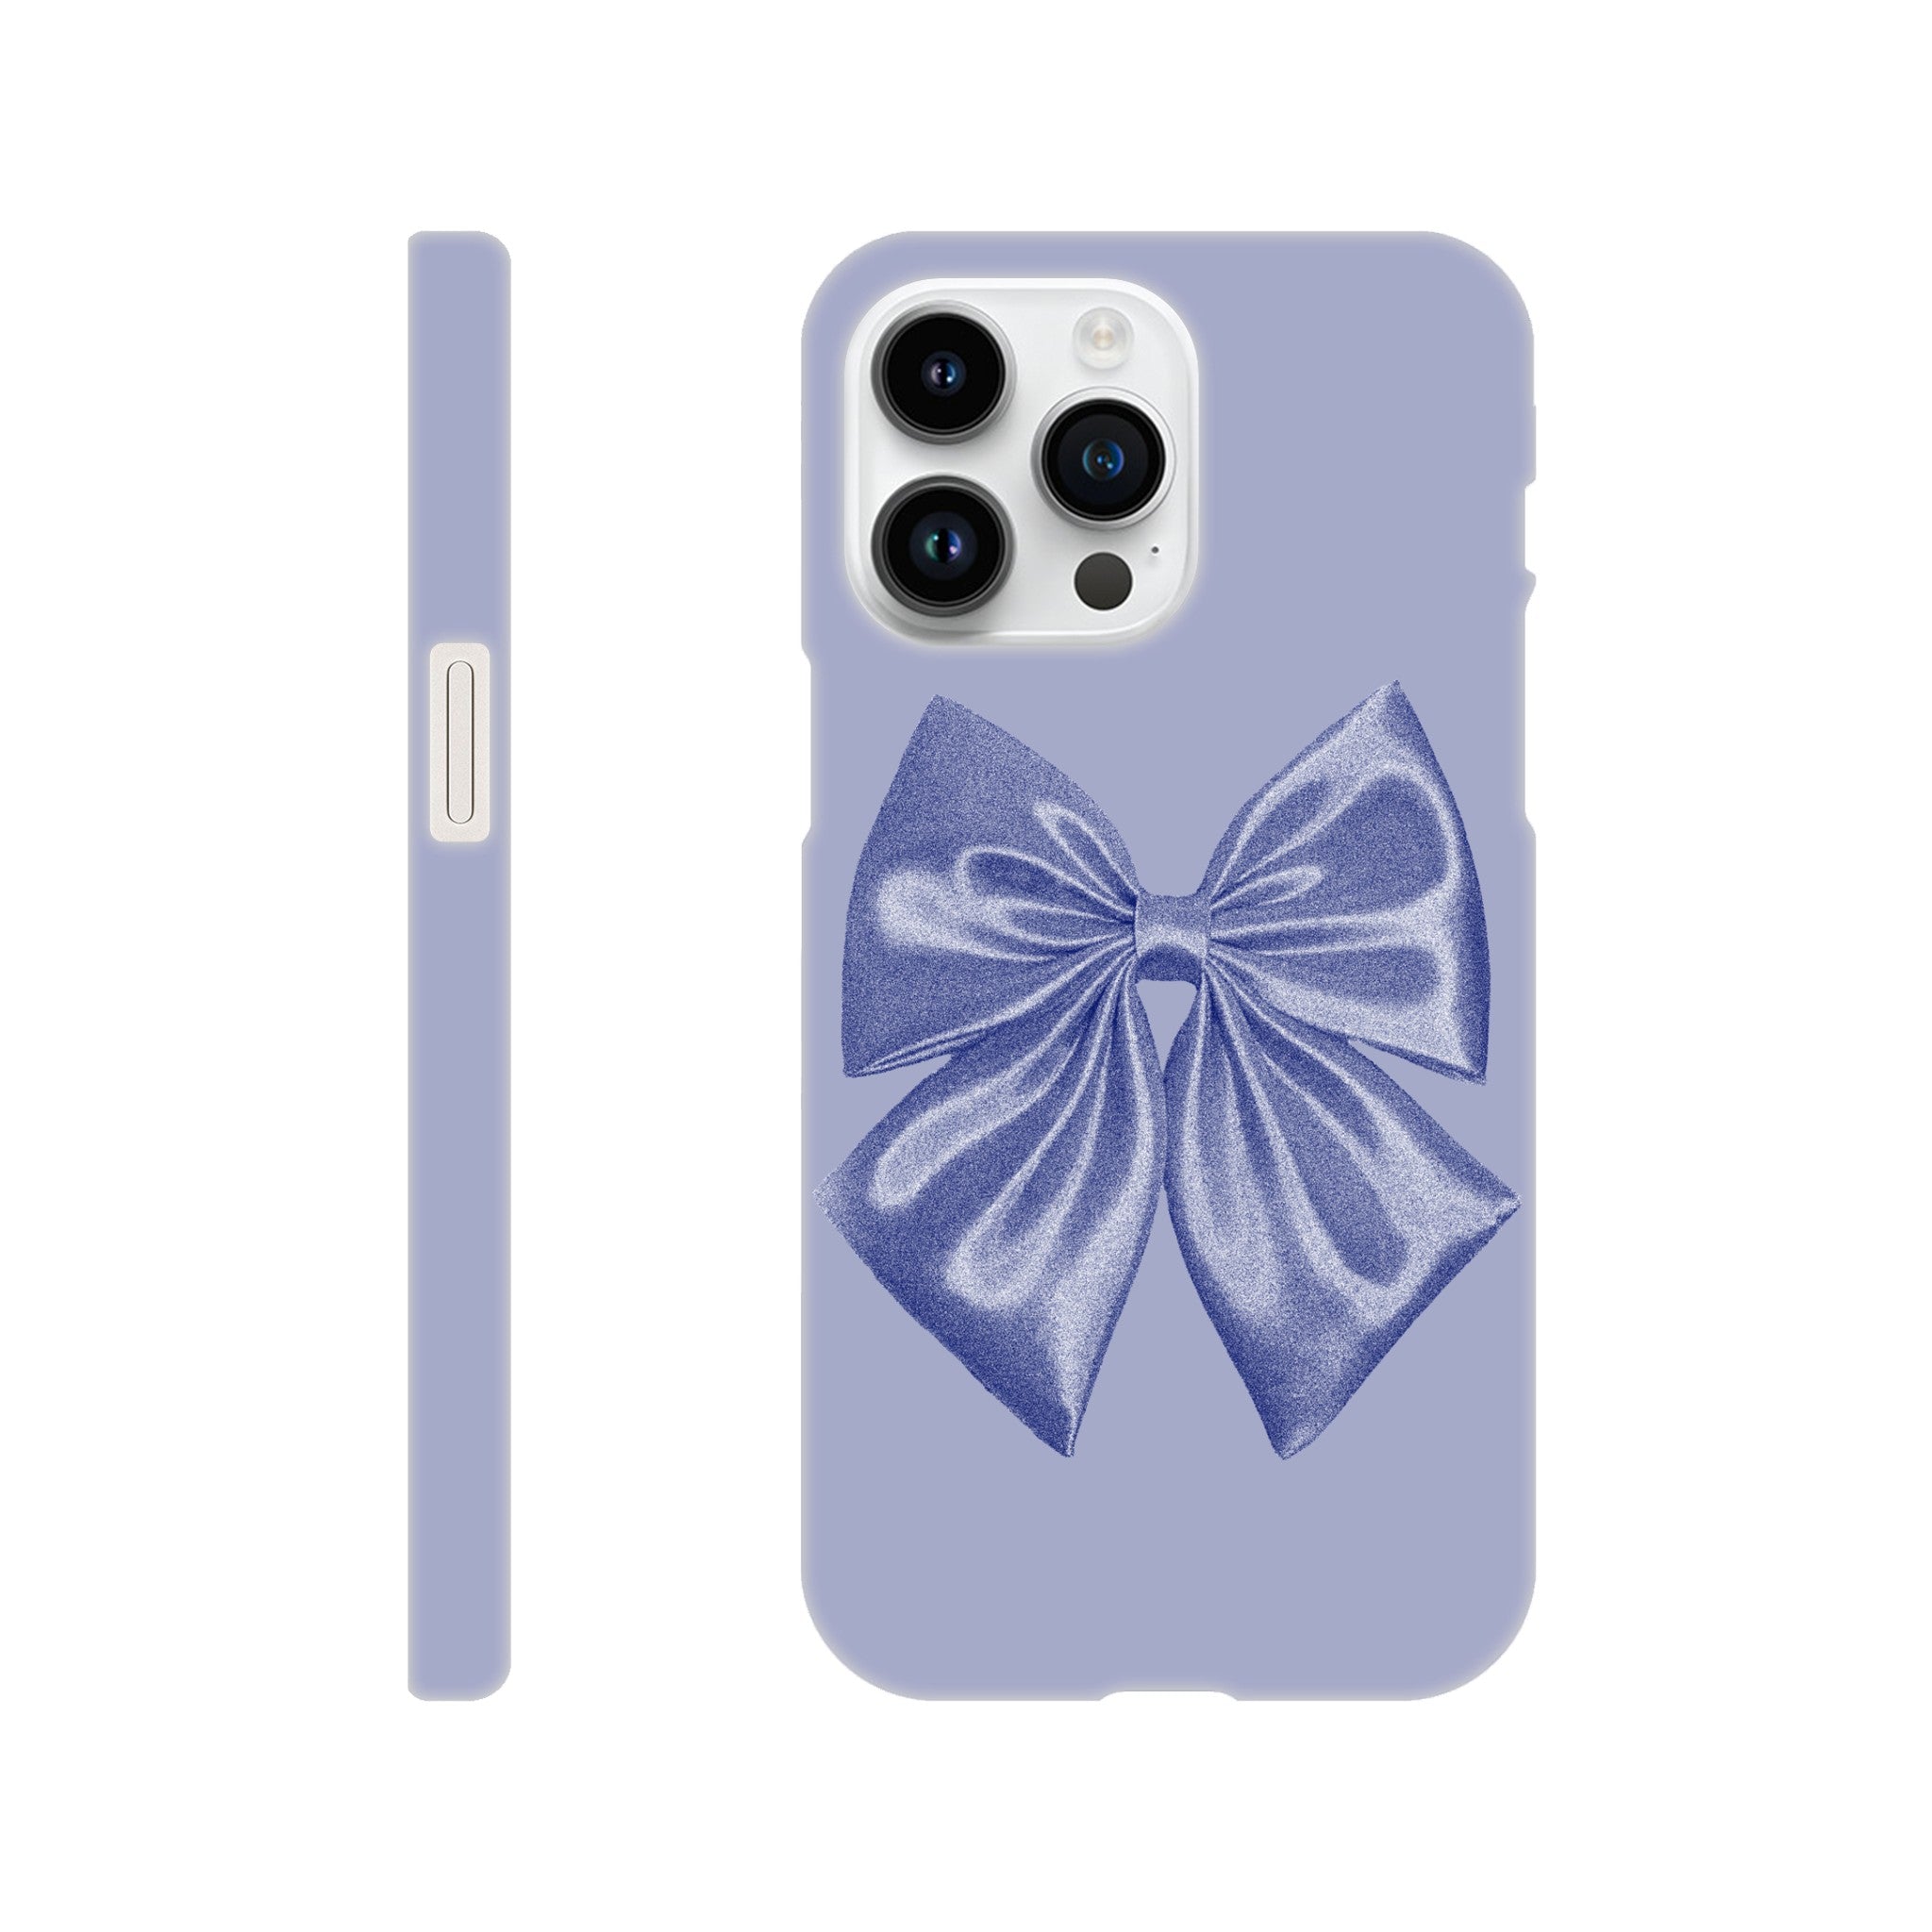 'Wrapped Up' phone case